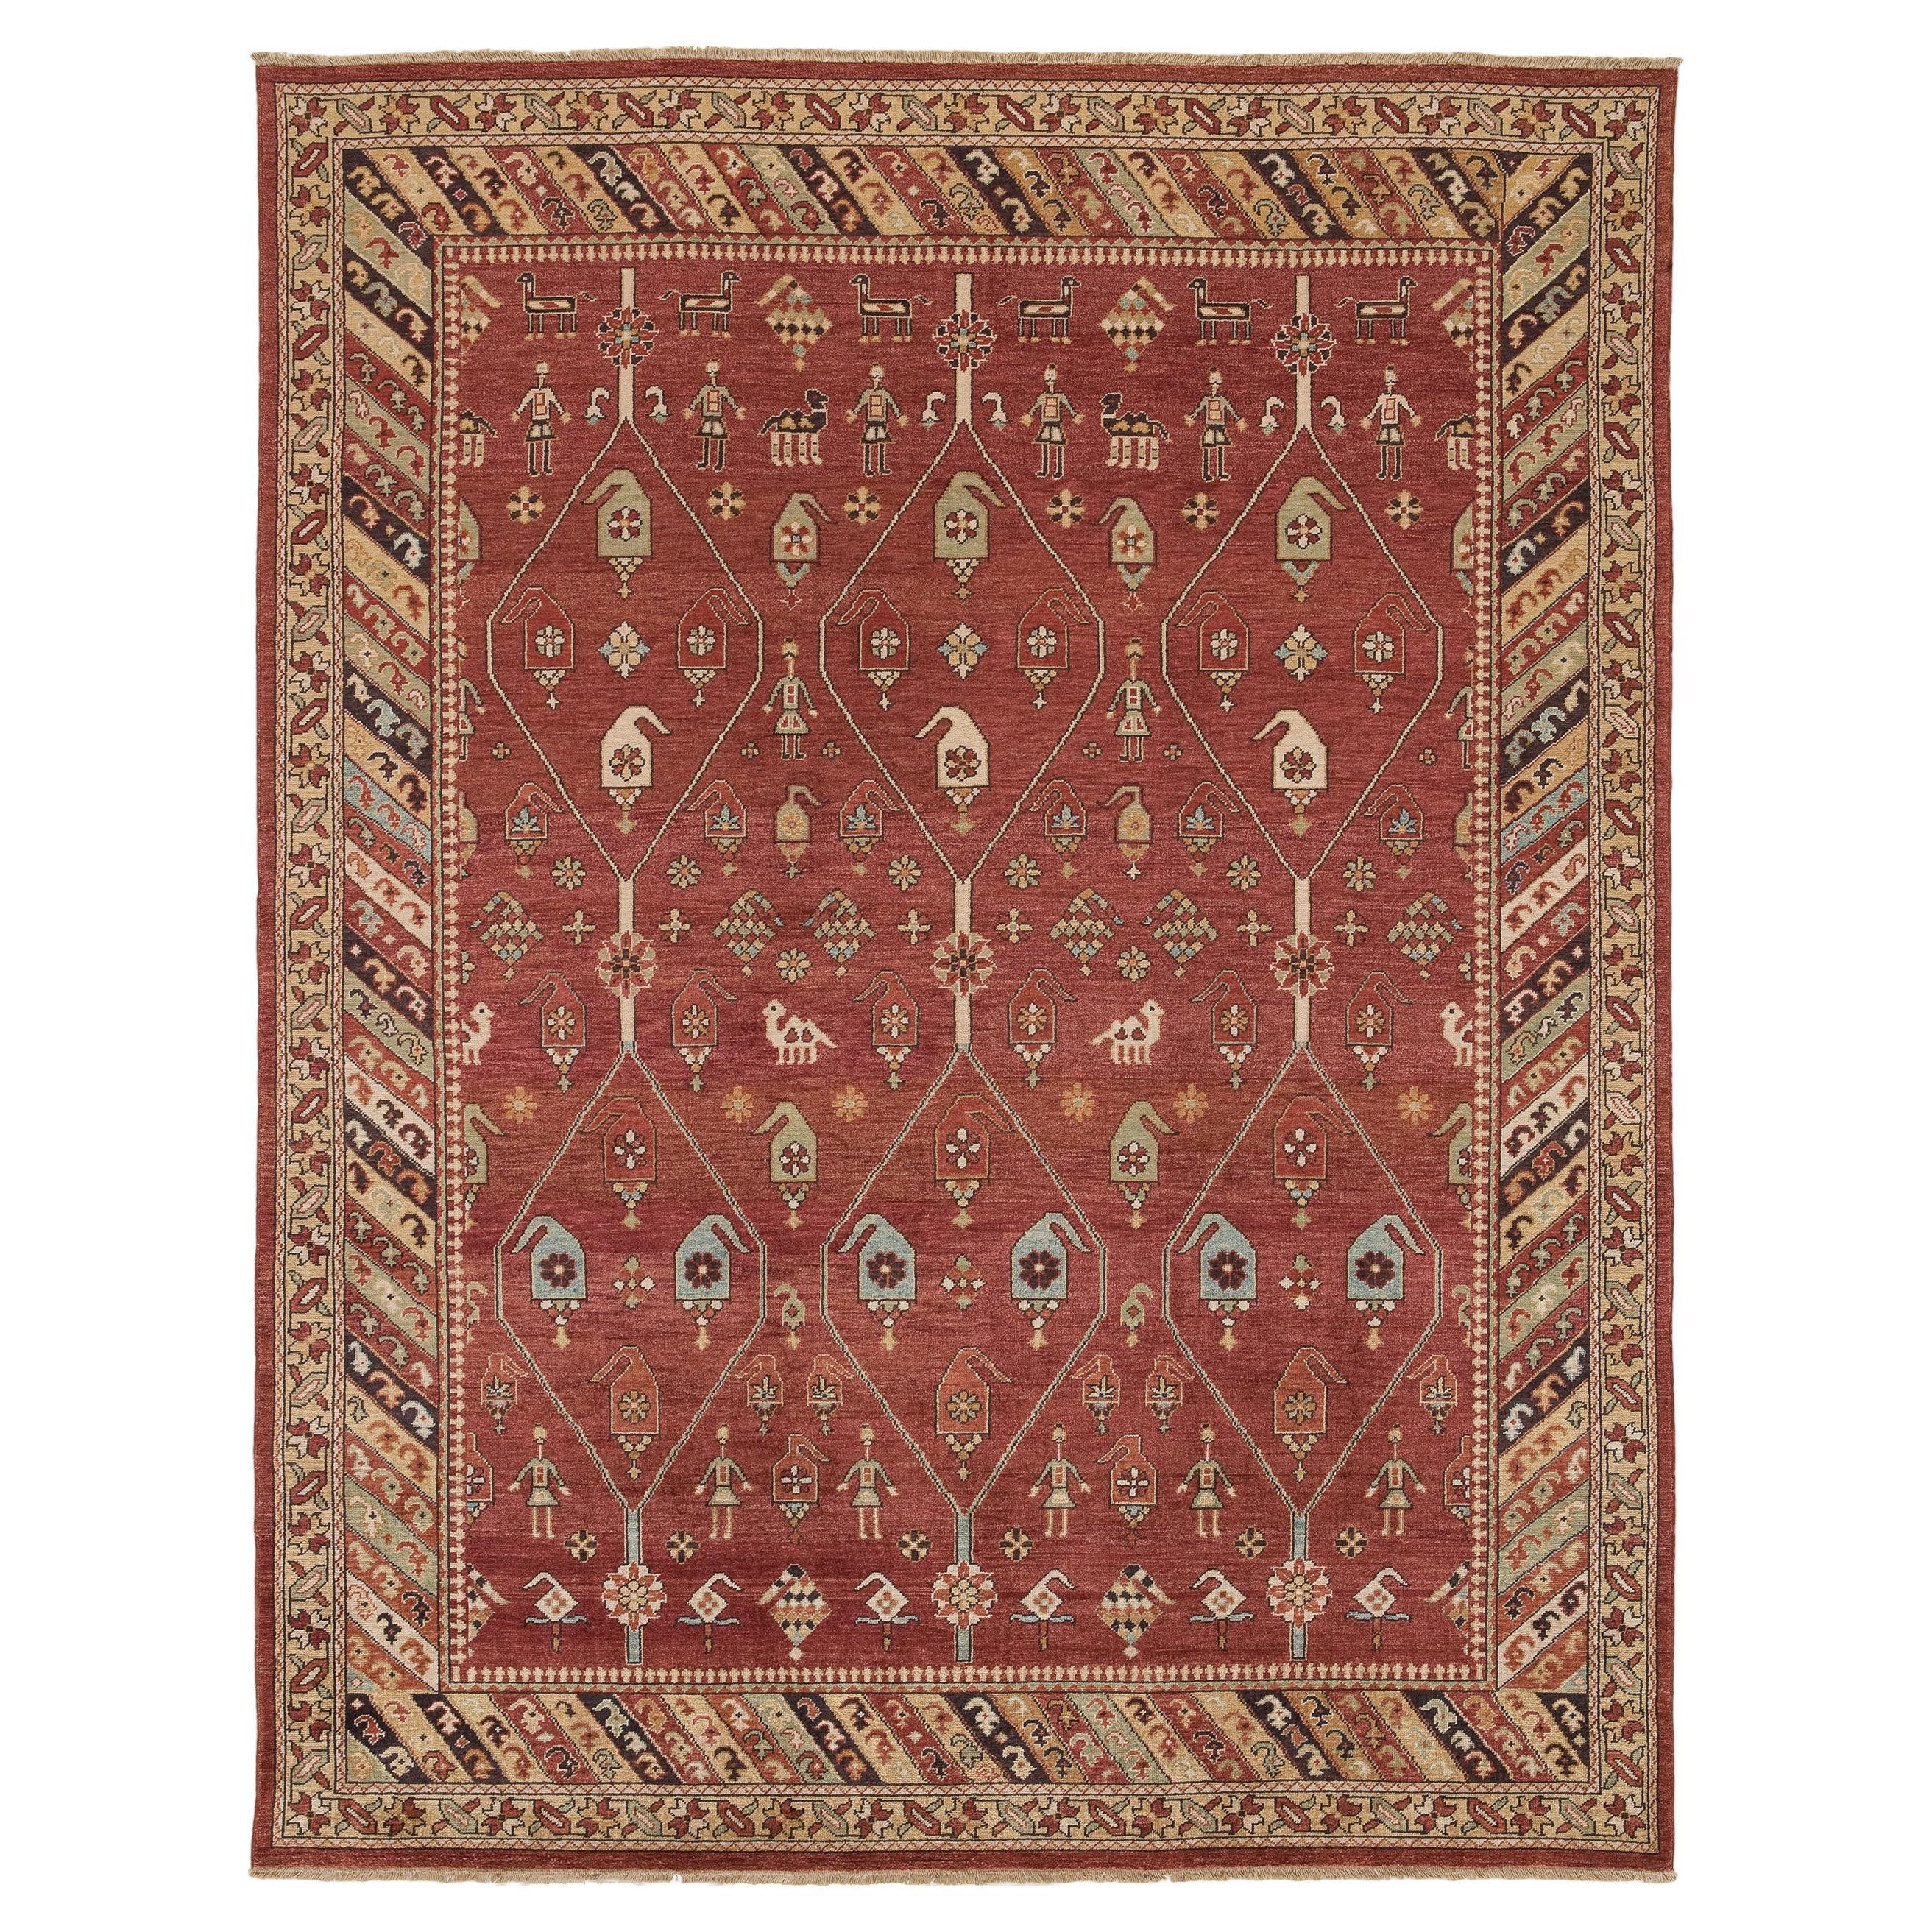 Luxury Traditional Hand-Knotted Red/Brown 11x18 Rug